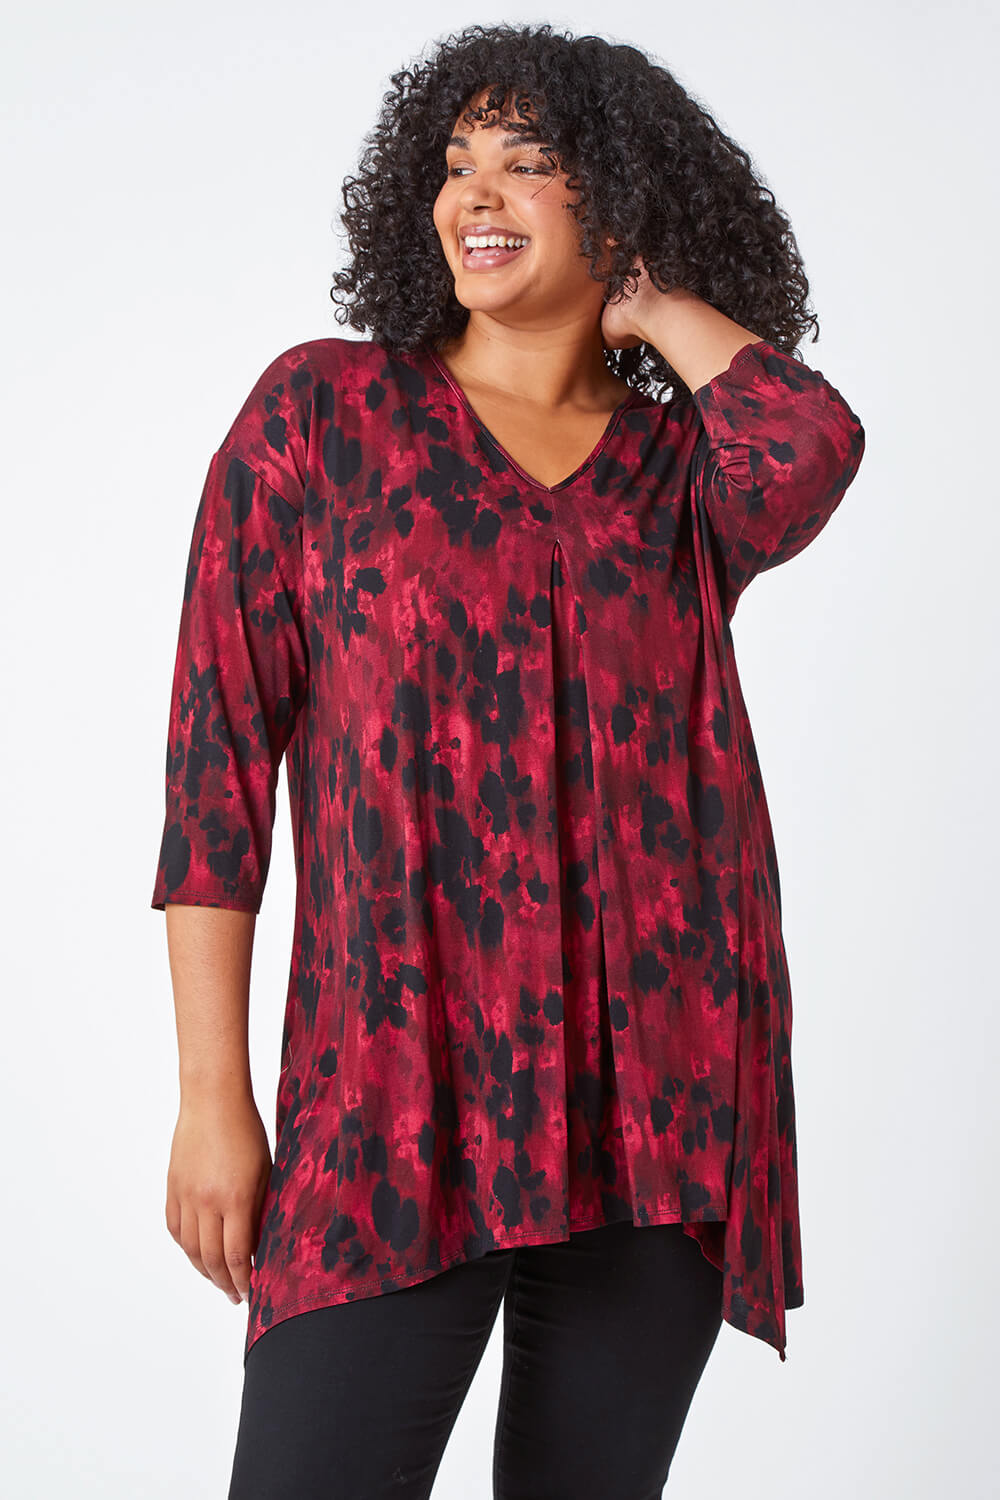 Maroon Curve Tie Back Tunic Stretch Top, Image 4 of 5